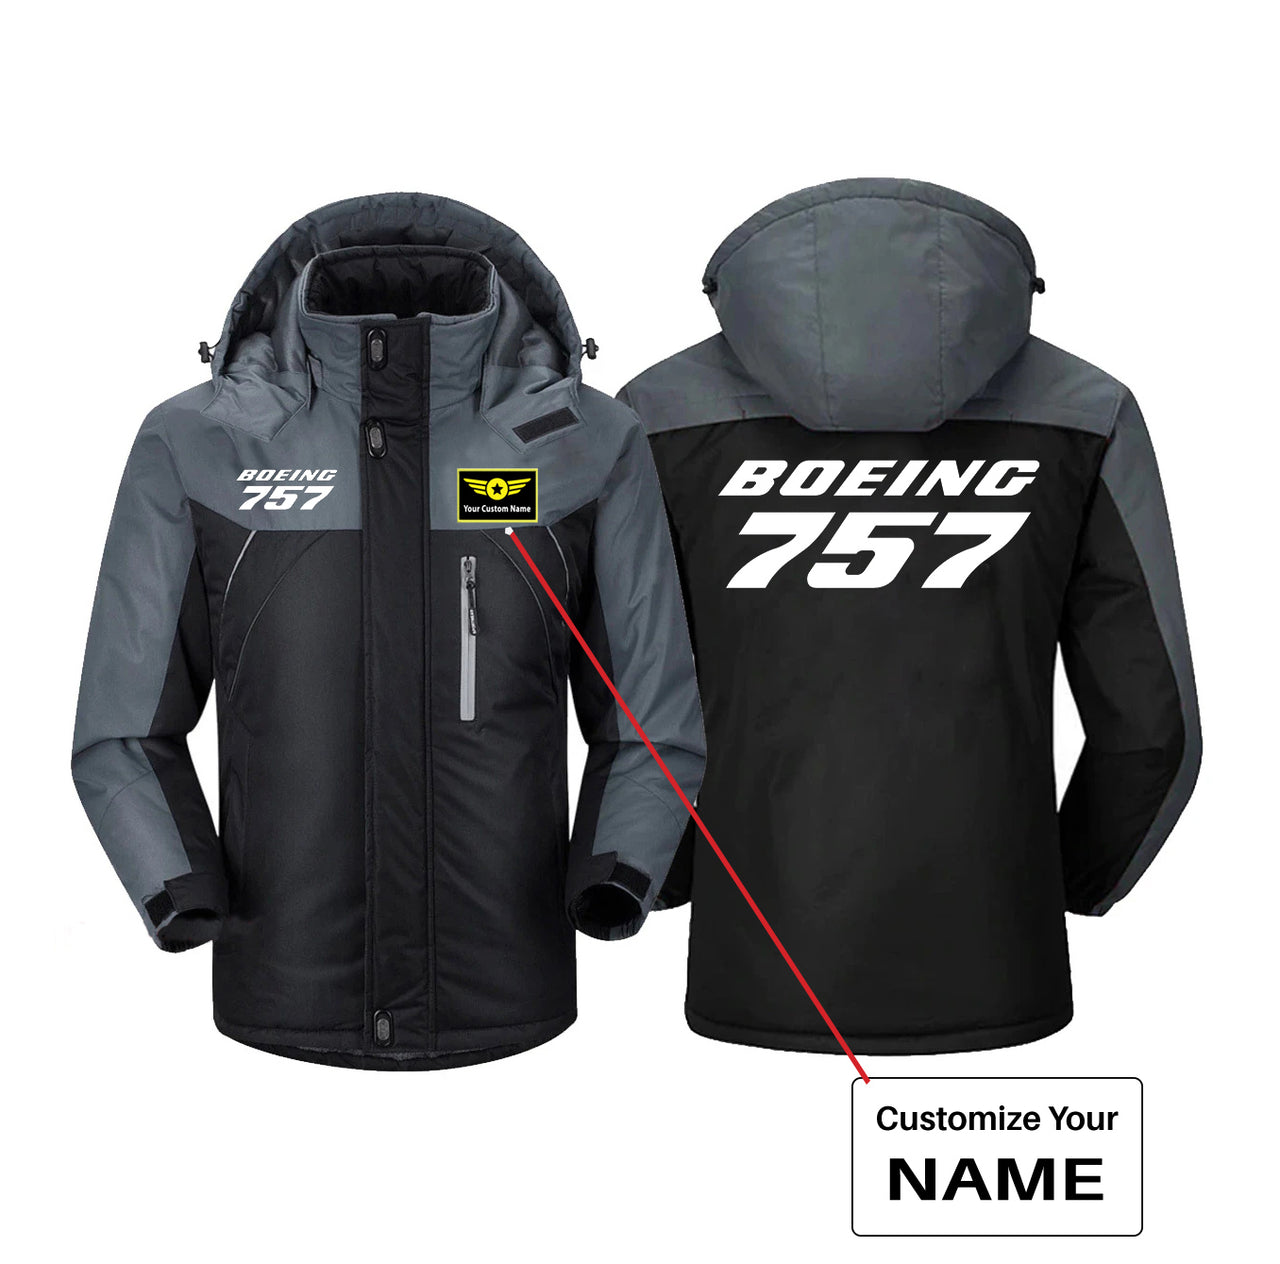 Boeing 757 & Text Designed Thick Winter Jackets